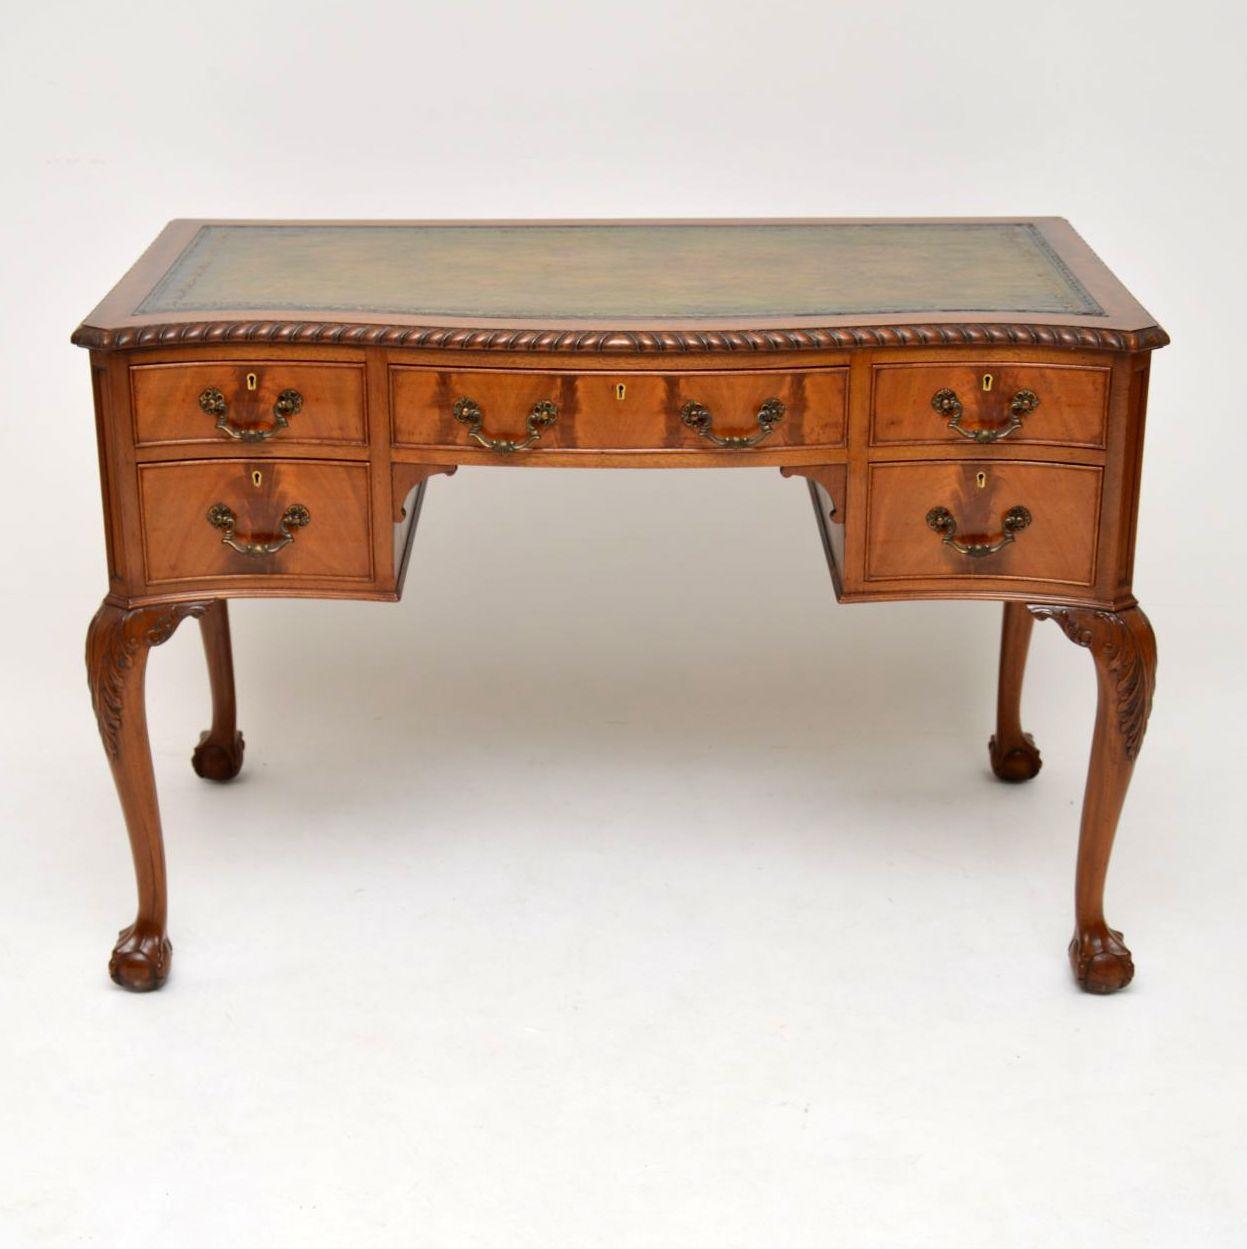 Fine quality antique Chippendale style leather top mahogany desk dating from circa 1900-1910 period and in excellent condition. It has a hand colored tooled leather writing surface with a gadrooned edge going all the way around. This desk has a